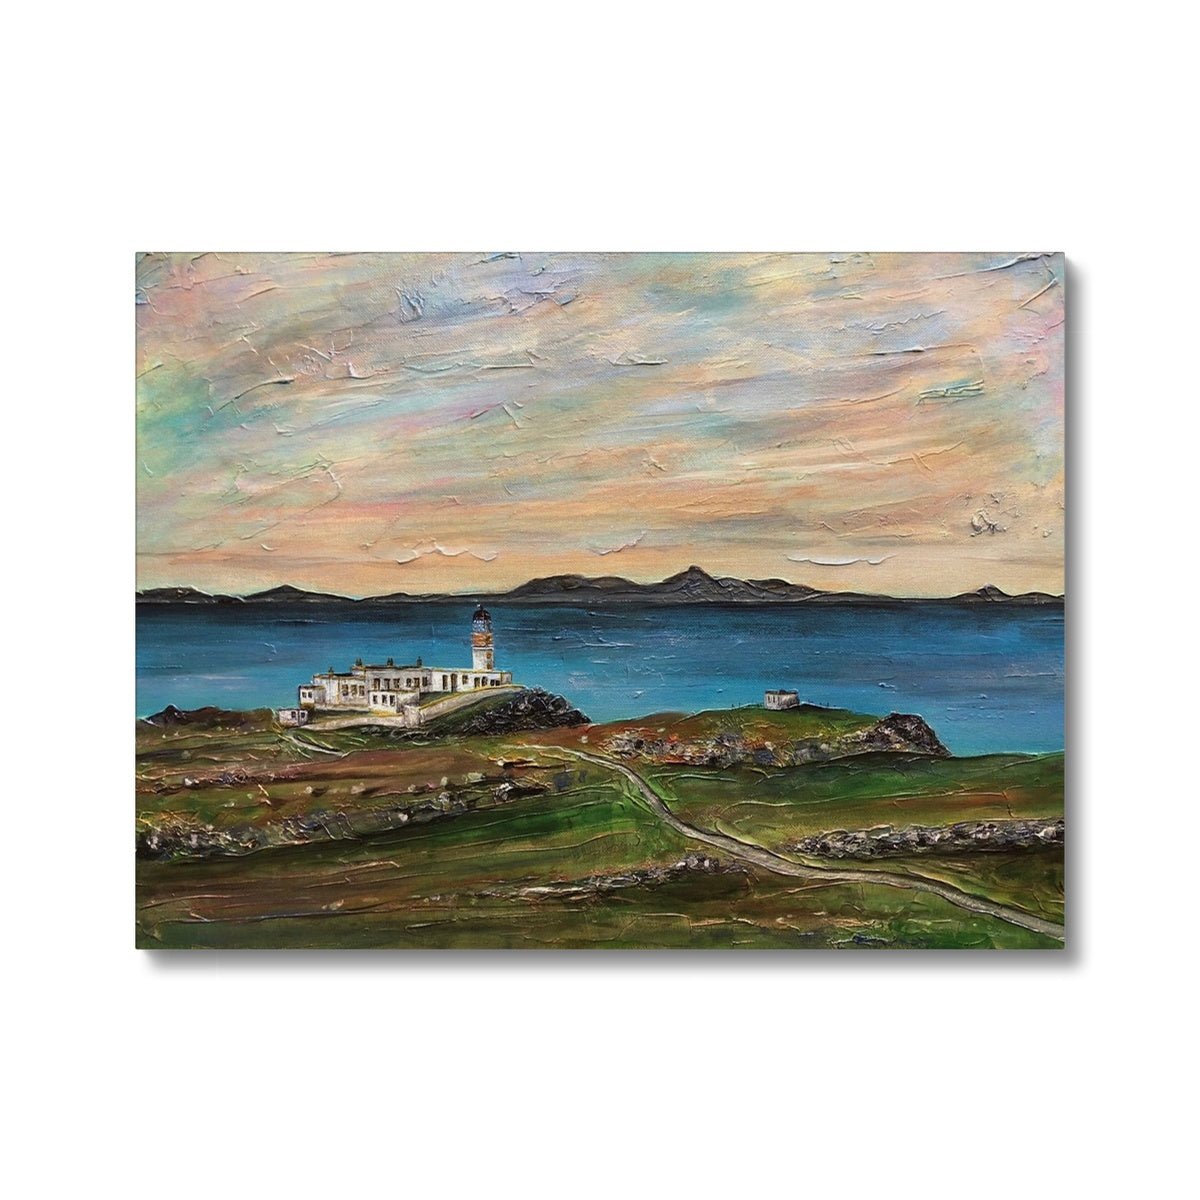 Neist Point Skye Painting | Canvas From Scotland-Contemporary Stretched Canvas Prints-Skye Art Gallery-24"x18"-Paintings, Prints, Homeware, Art Gifts From Scotland By Scottish Artist Kevin Hunter